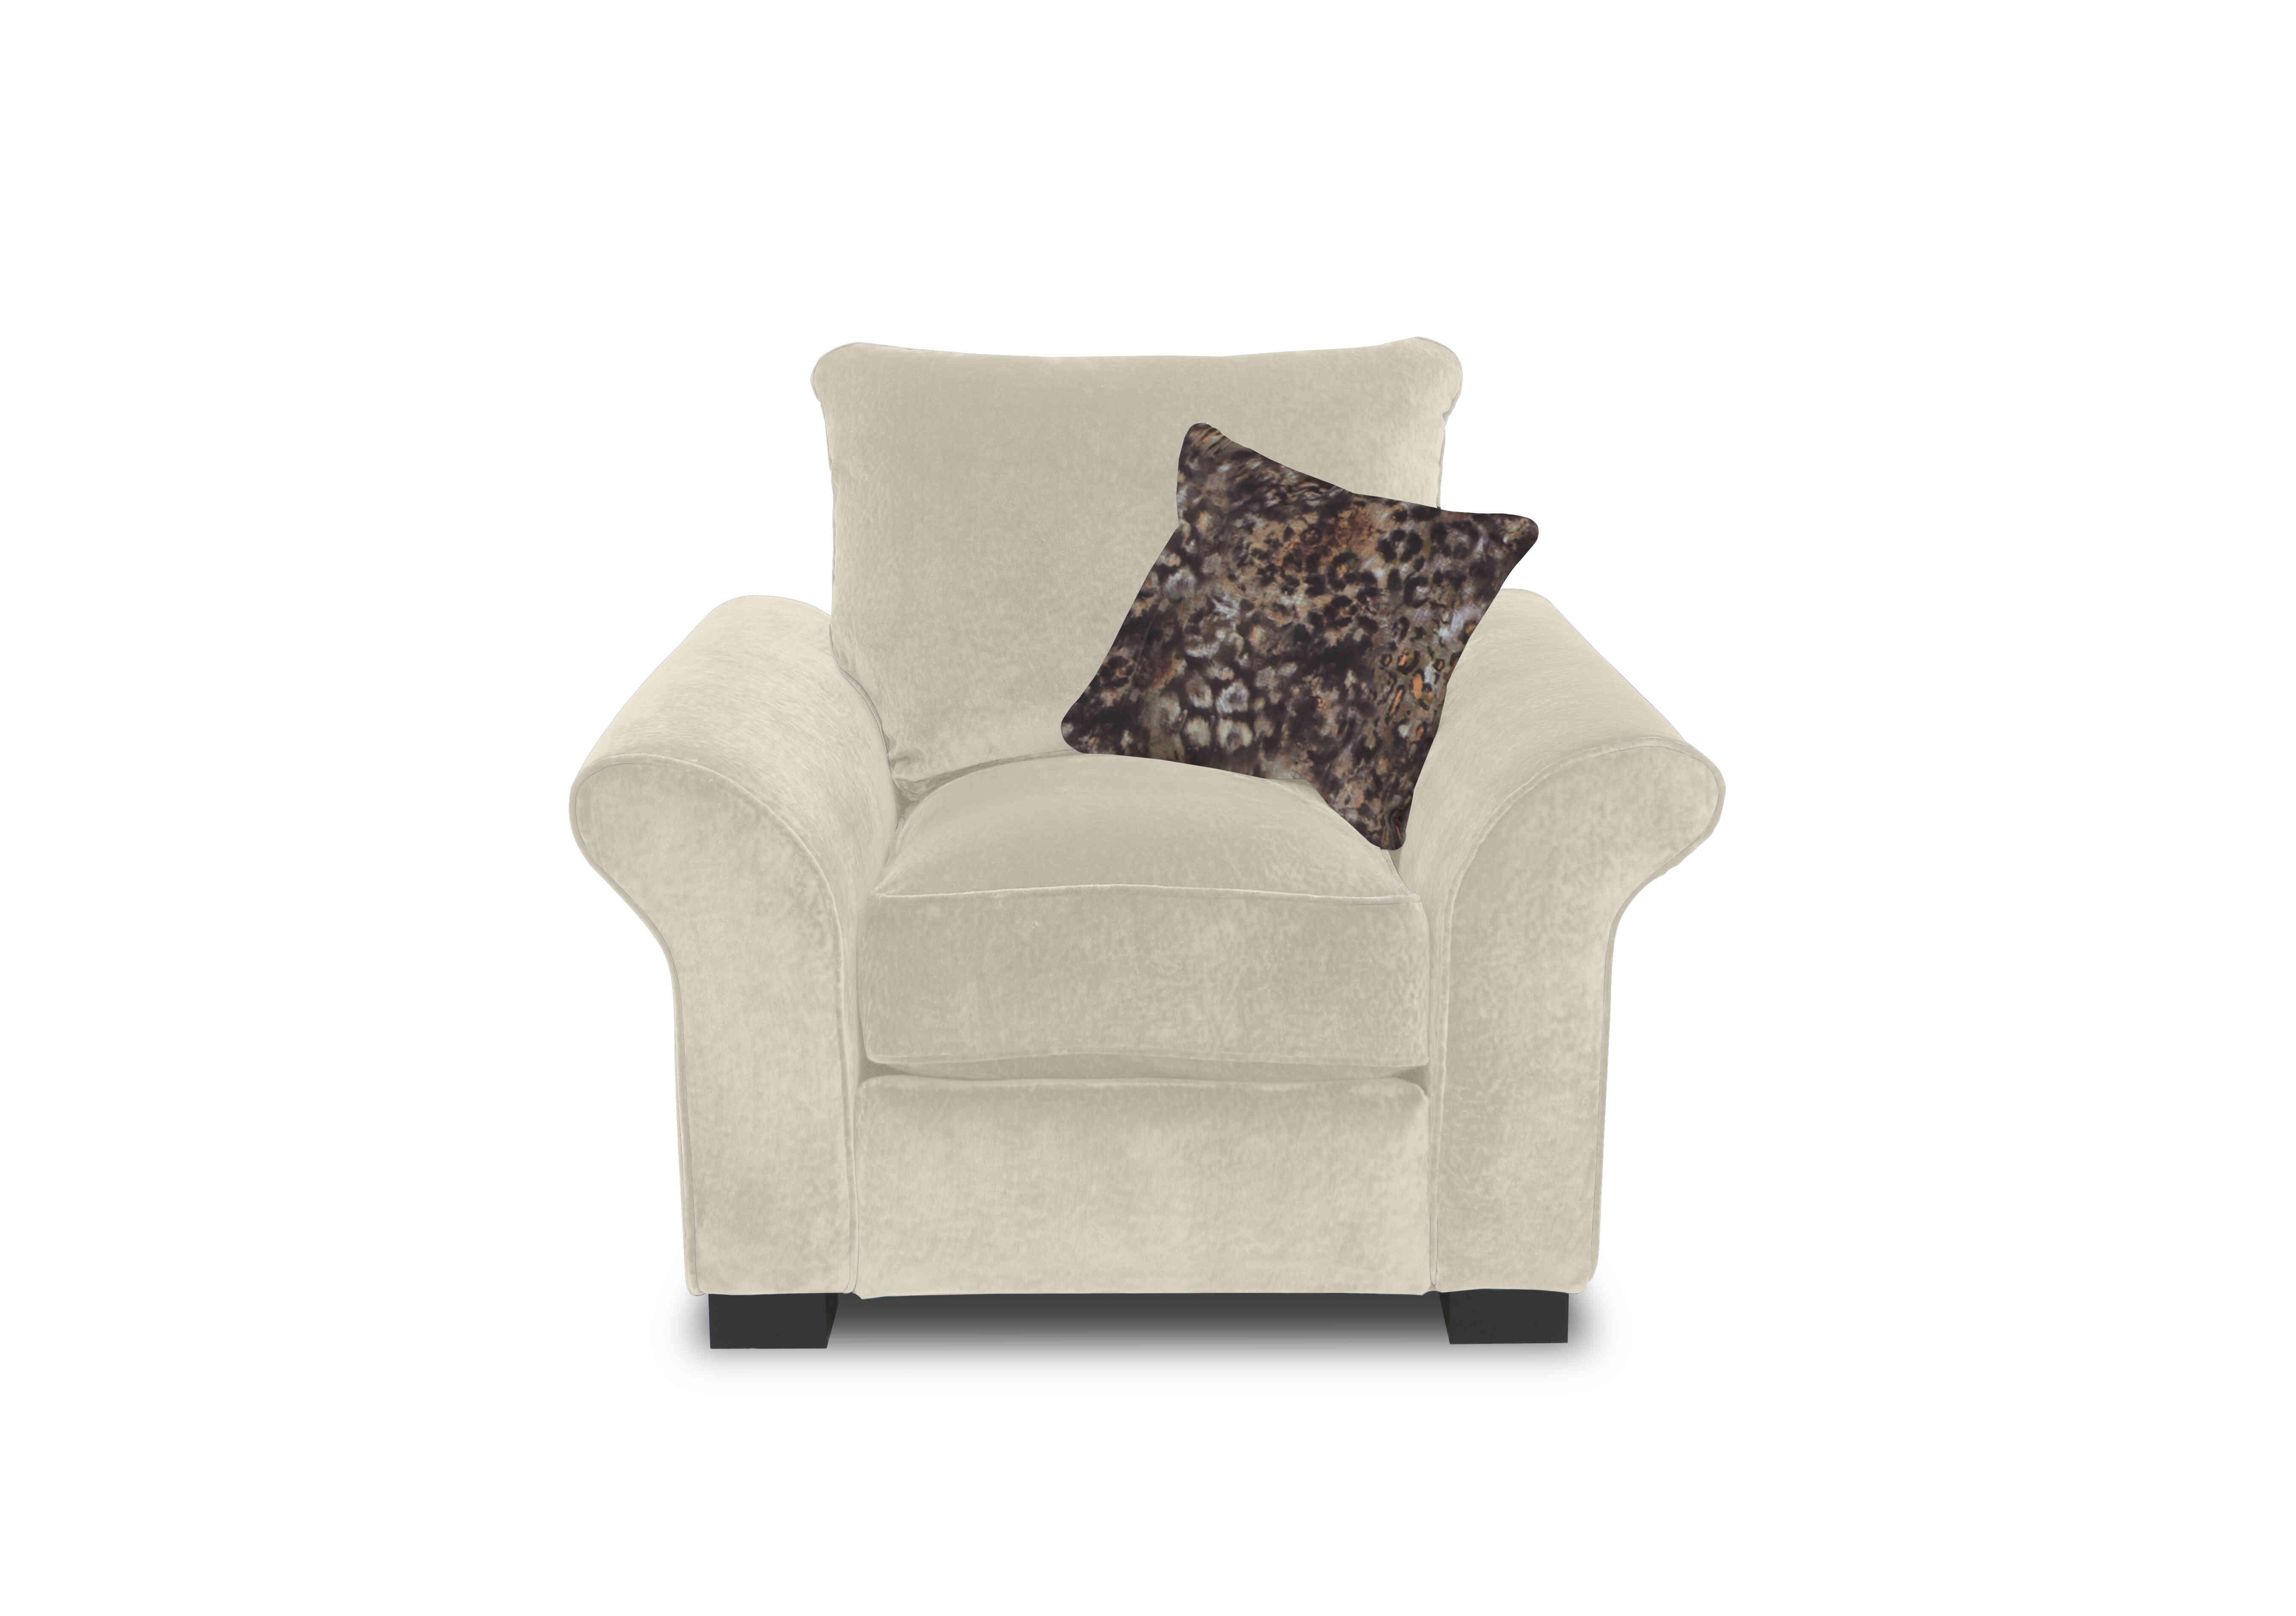 Modern Classics Hyde Park Chair in Remini Pebble Sp Mf on Furniture Village